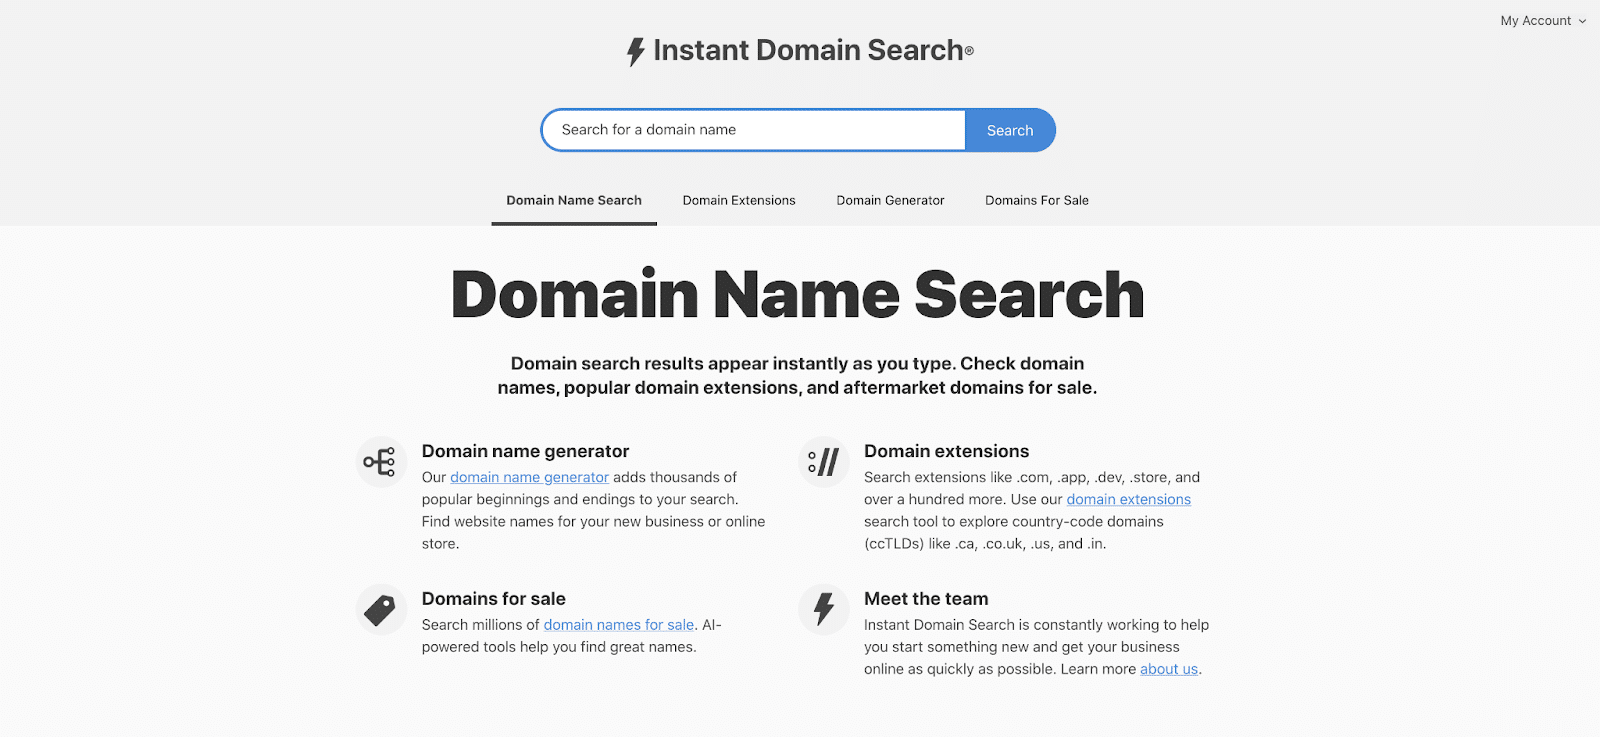 Instant Domain Search is a straightforward domain name generator